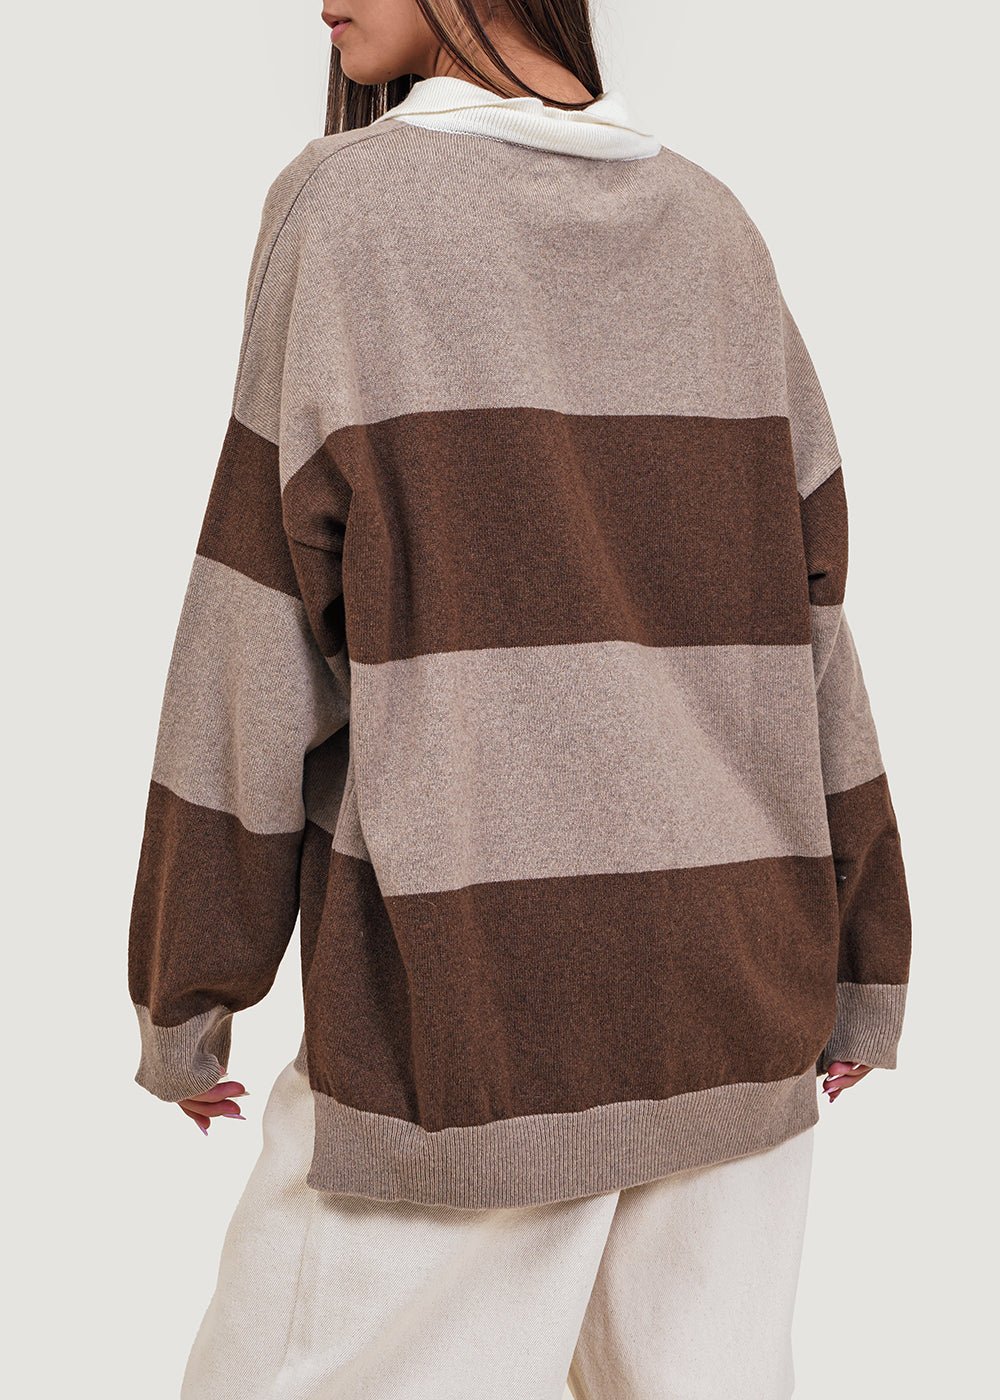 Cordera Taupe Cashmere Polo Sweater - New Classics Studios Sustainable Ethical Fashion Canada